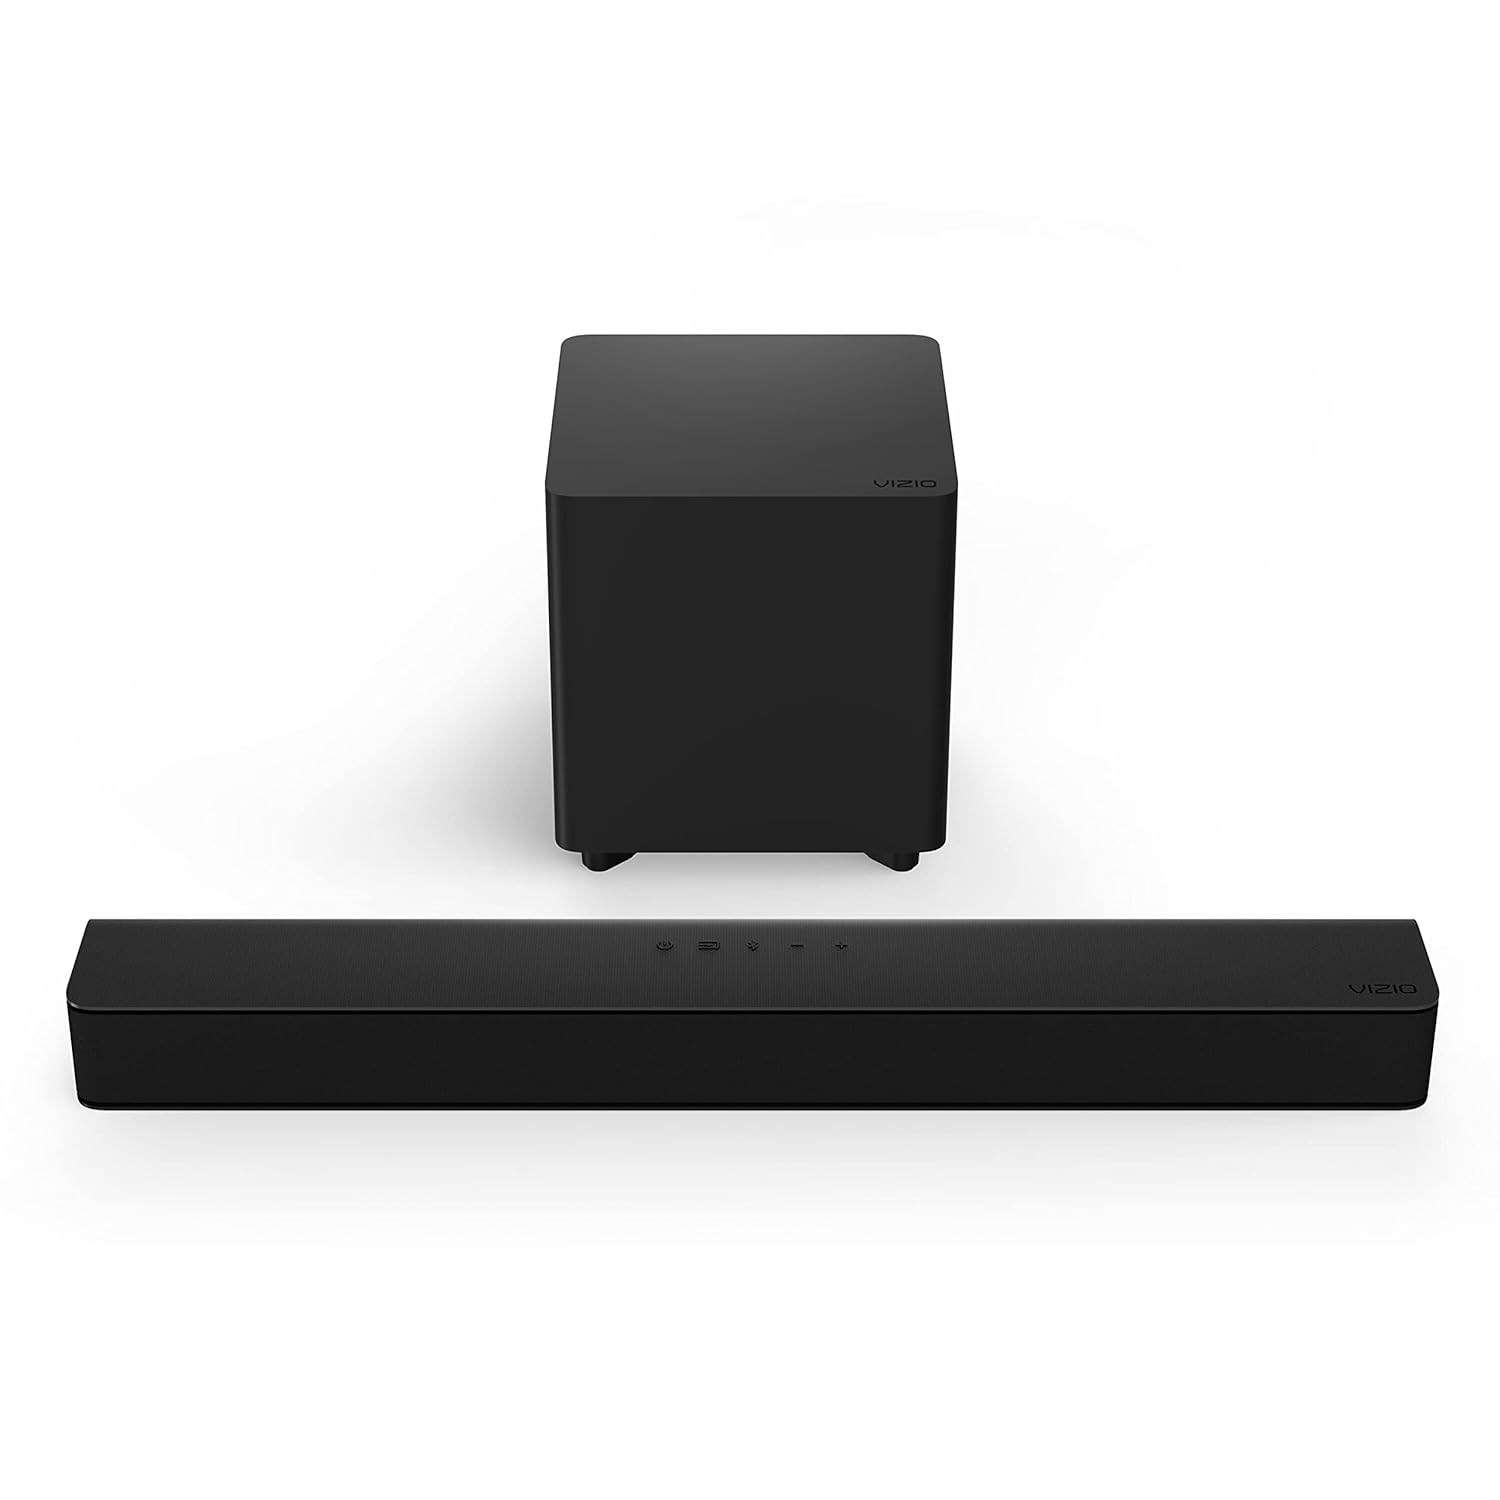 VIZIO V-Series 2.1 Compact Home Theater Sound Bar with DTS Virtual:X, Bluetooth, Wireless Subwoofer, Voice Assistant Compatib…